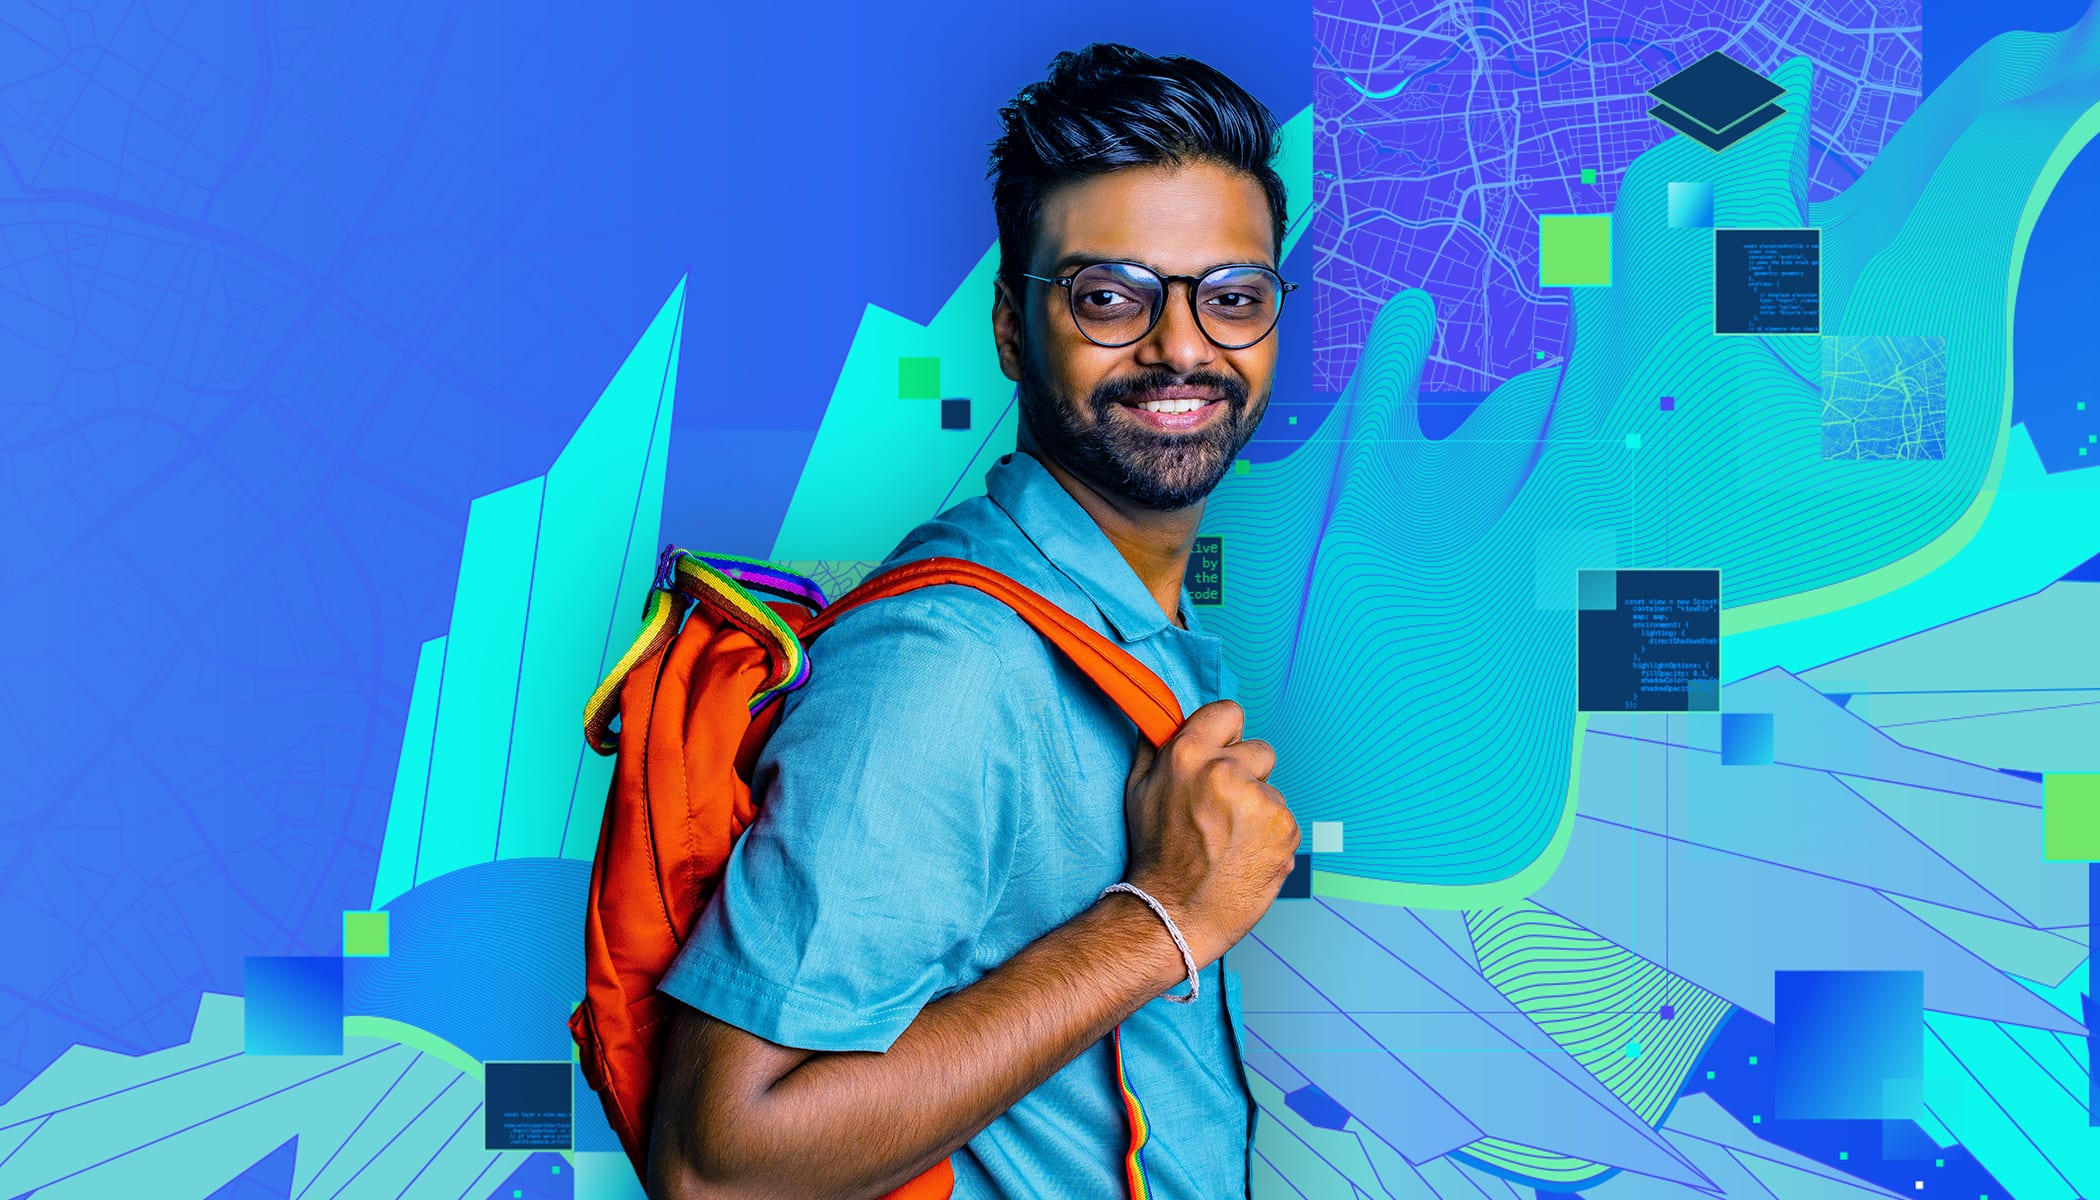 A person in a blue shirt, wearing an orange backpack and glasses, and map imagery in the background